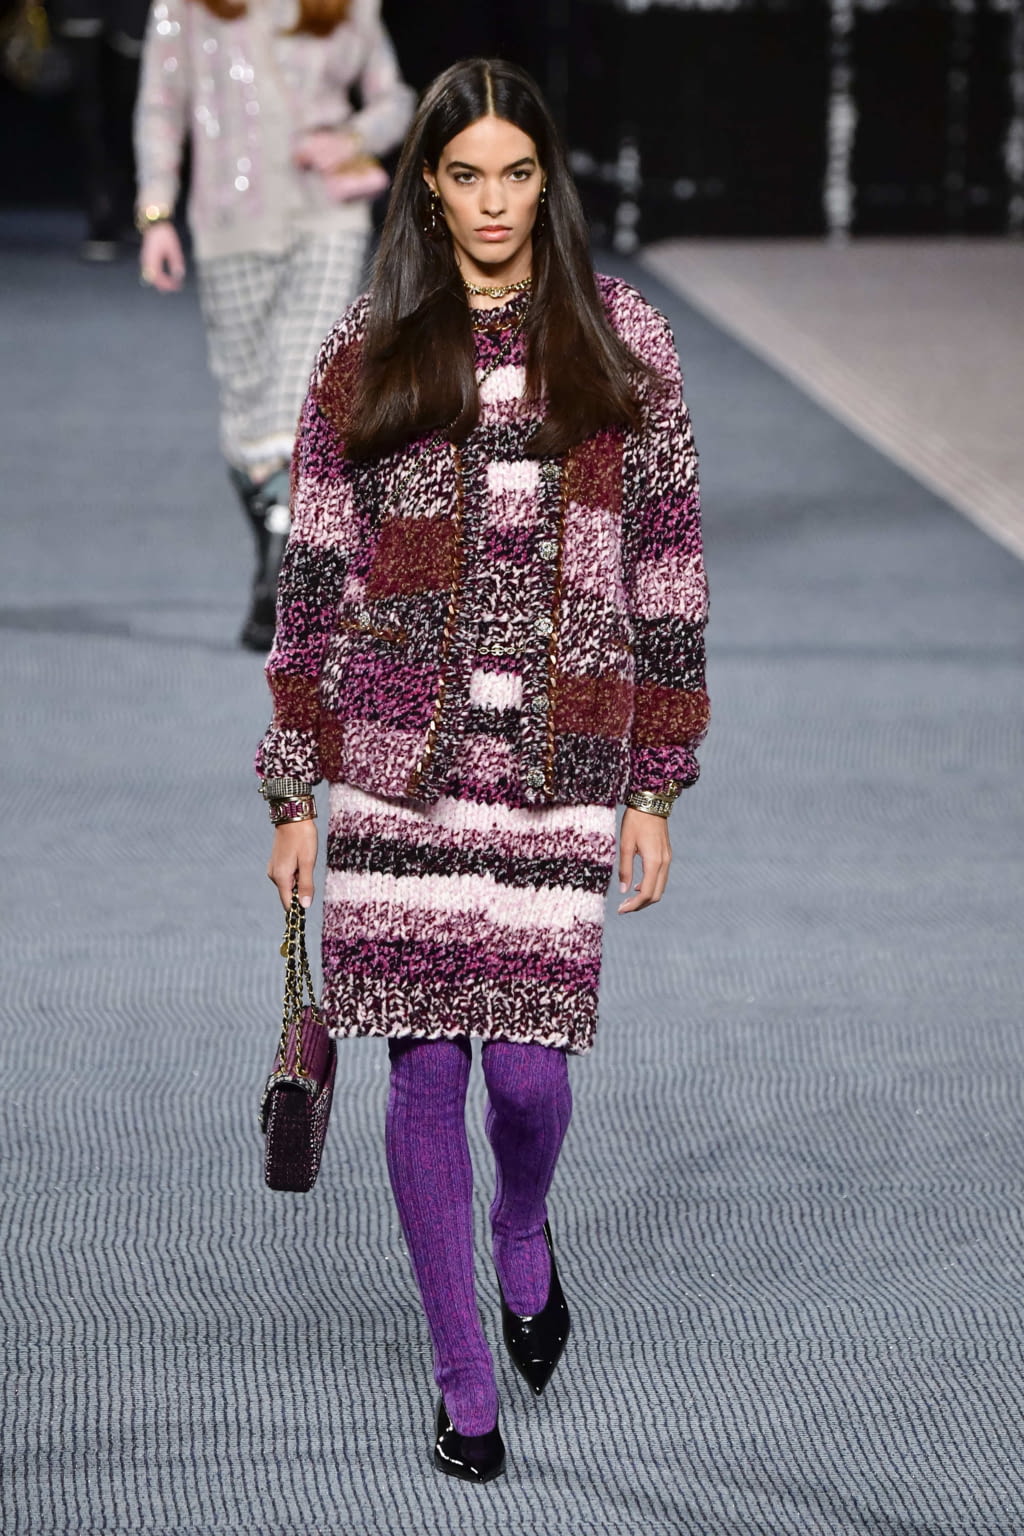 Grace Valentine walks the runway during the Louis Vuitton Womenswear  News Photo - Getty Images